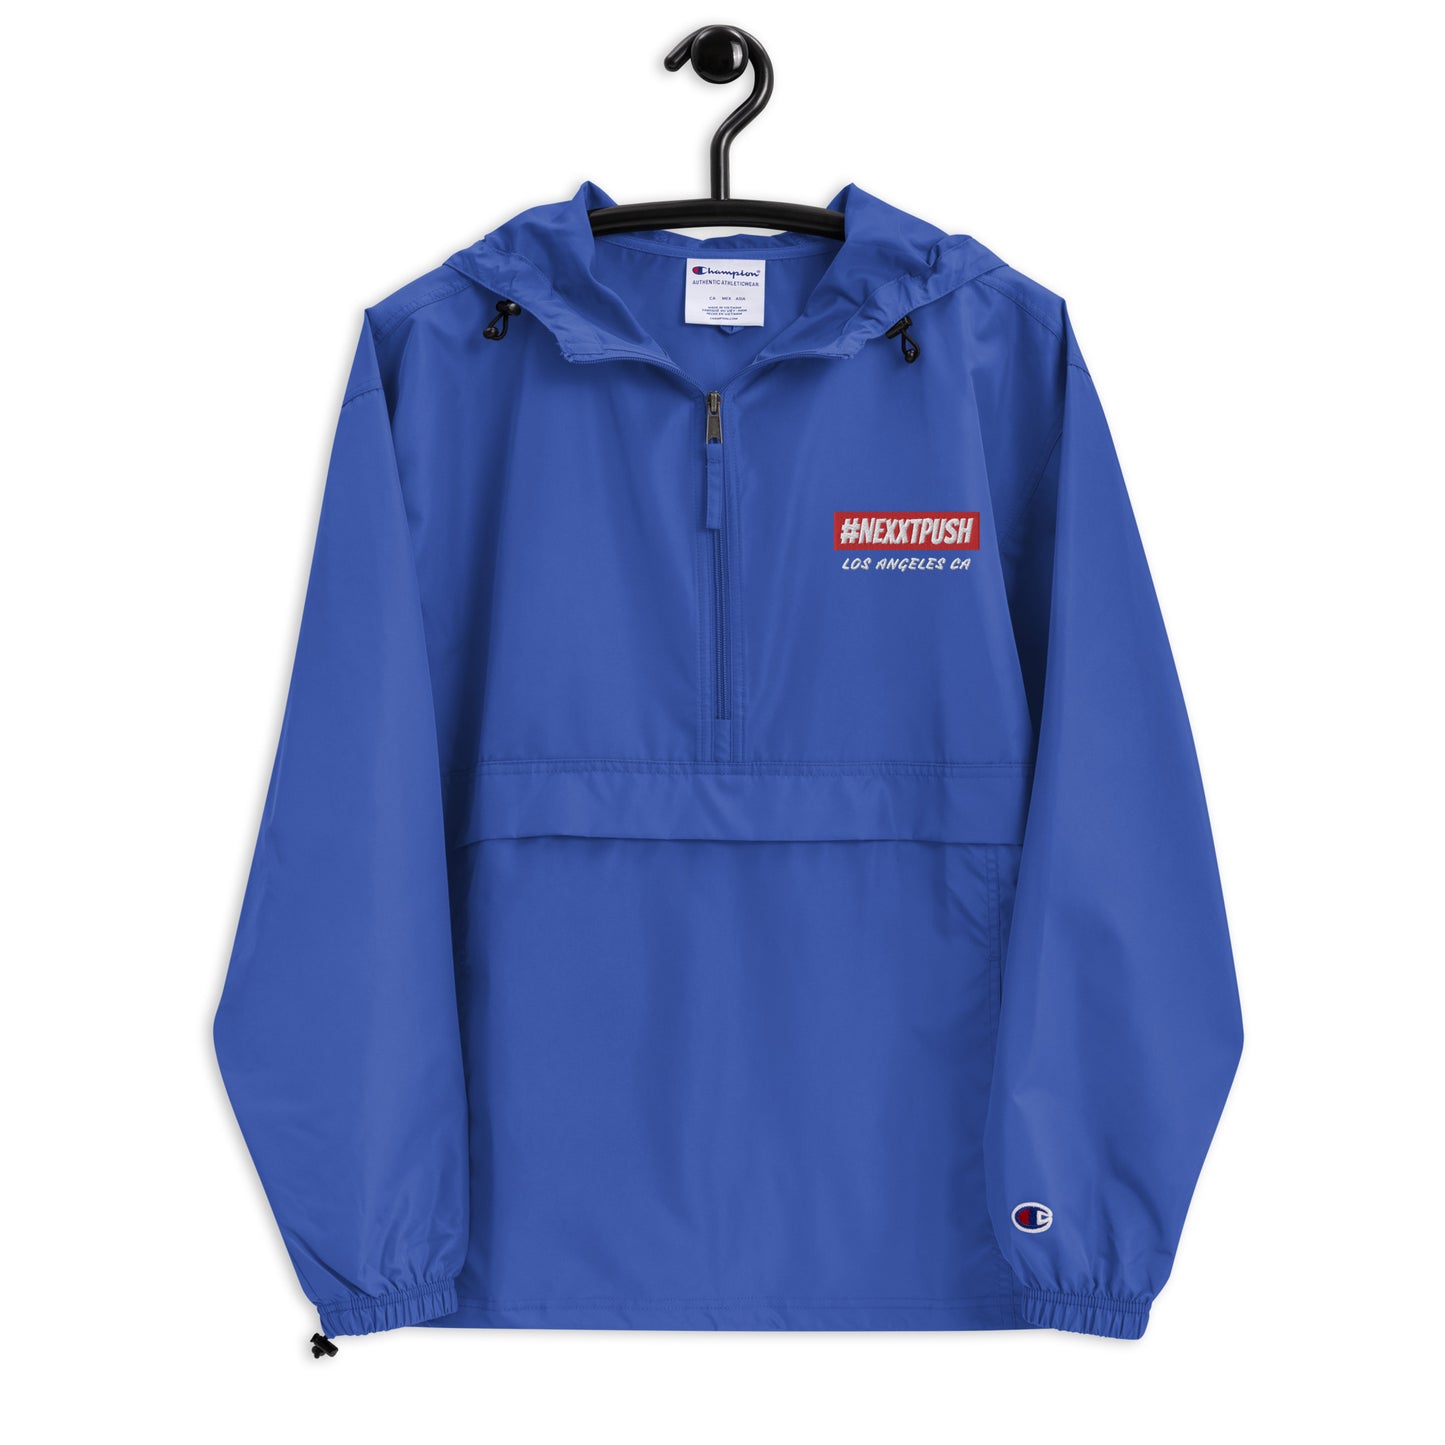 Champion #NEXXTPUSH Embroidered Packable Jacket